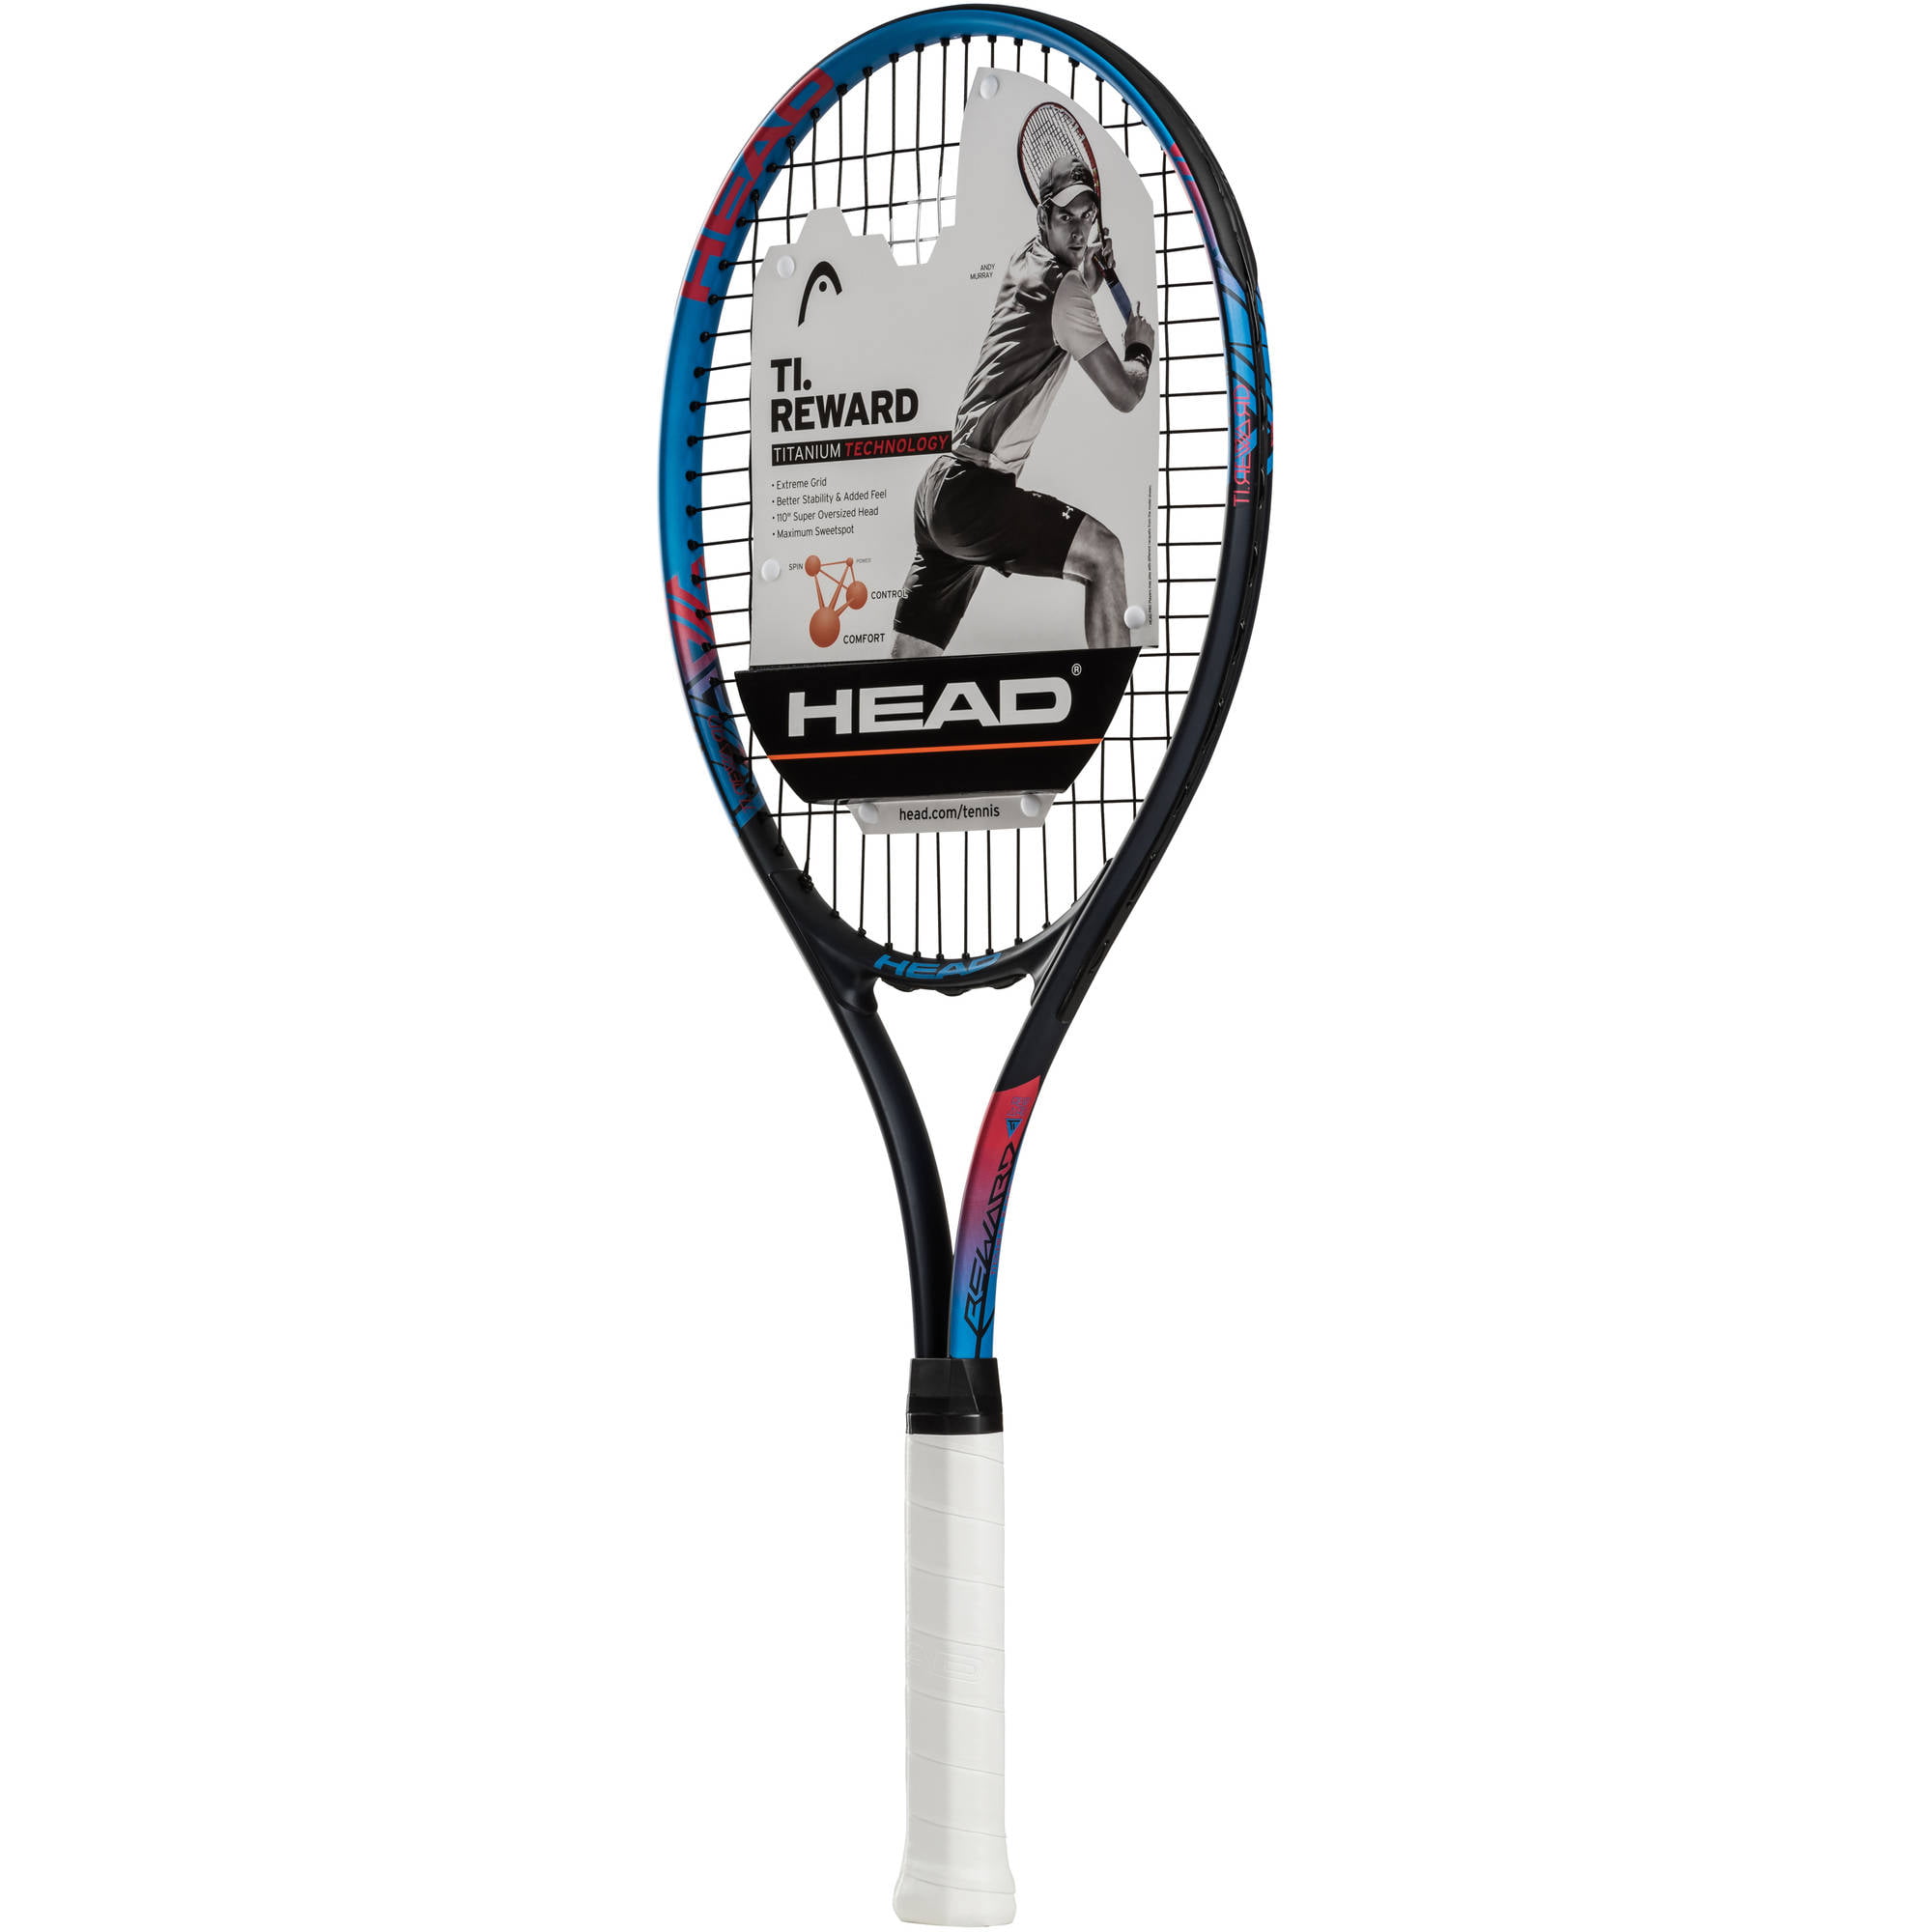 Head Ti.Murray 21 Junior Tennis Racket and Cover New in Packaging 